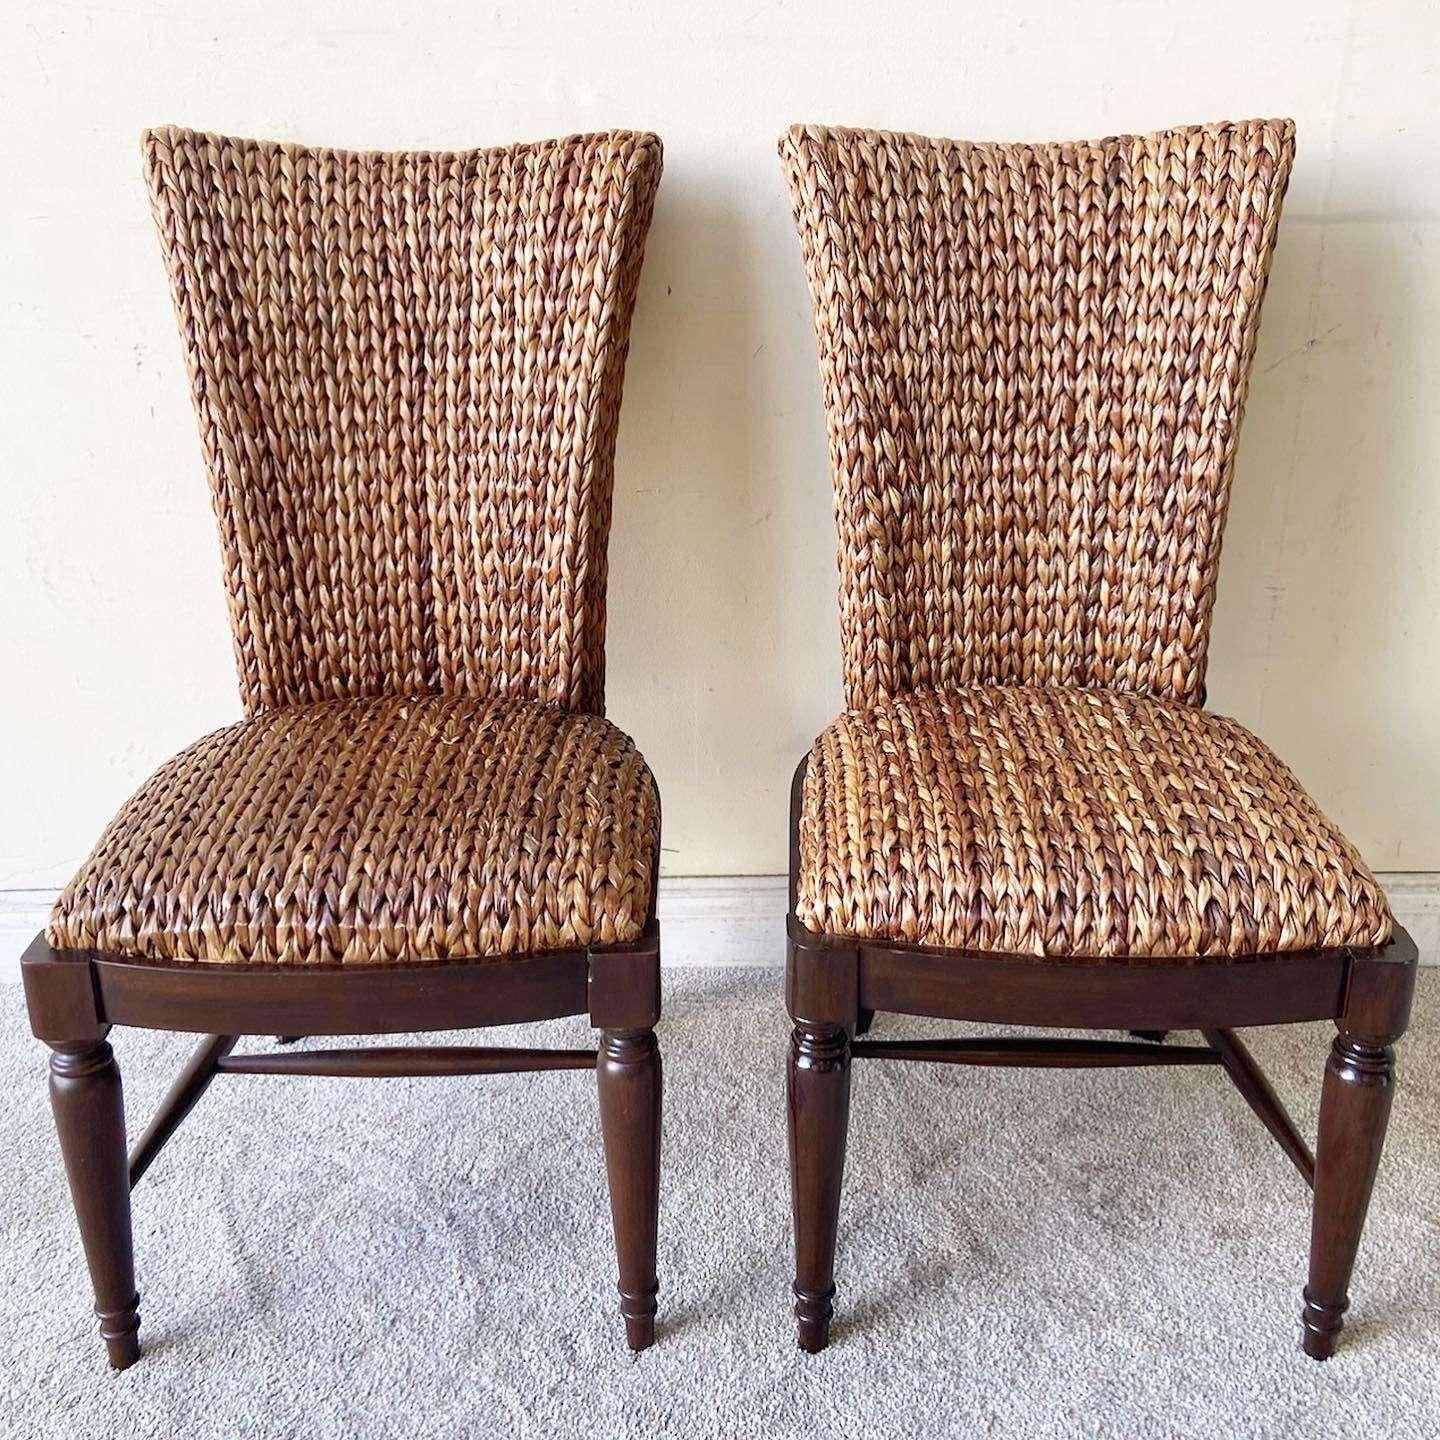 Exceptional set of 4 vintage boho chic dining chairs. Each feature a traditional wooden base with a woven sea grass back rest and seat.

Seat height is 19.0 in